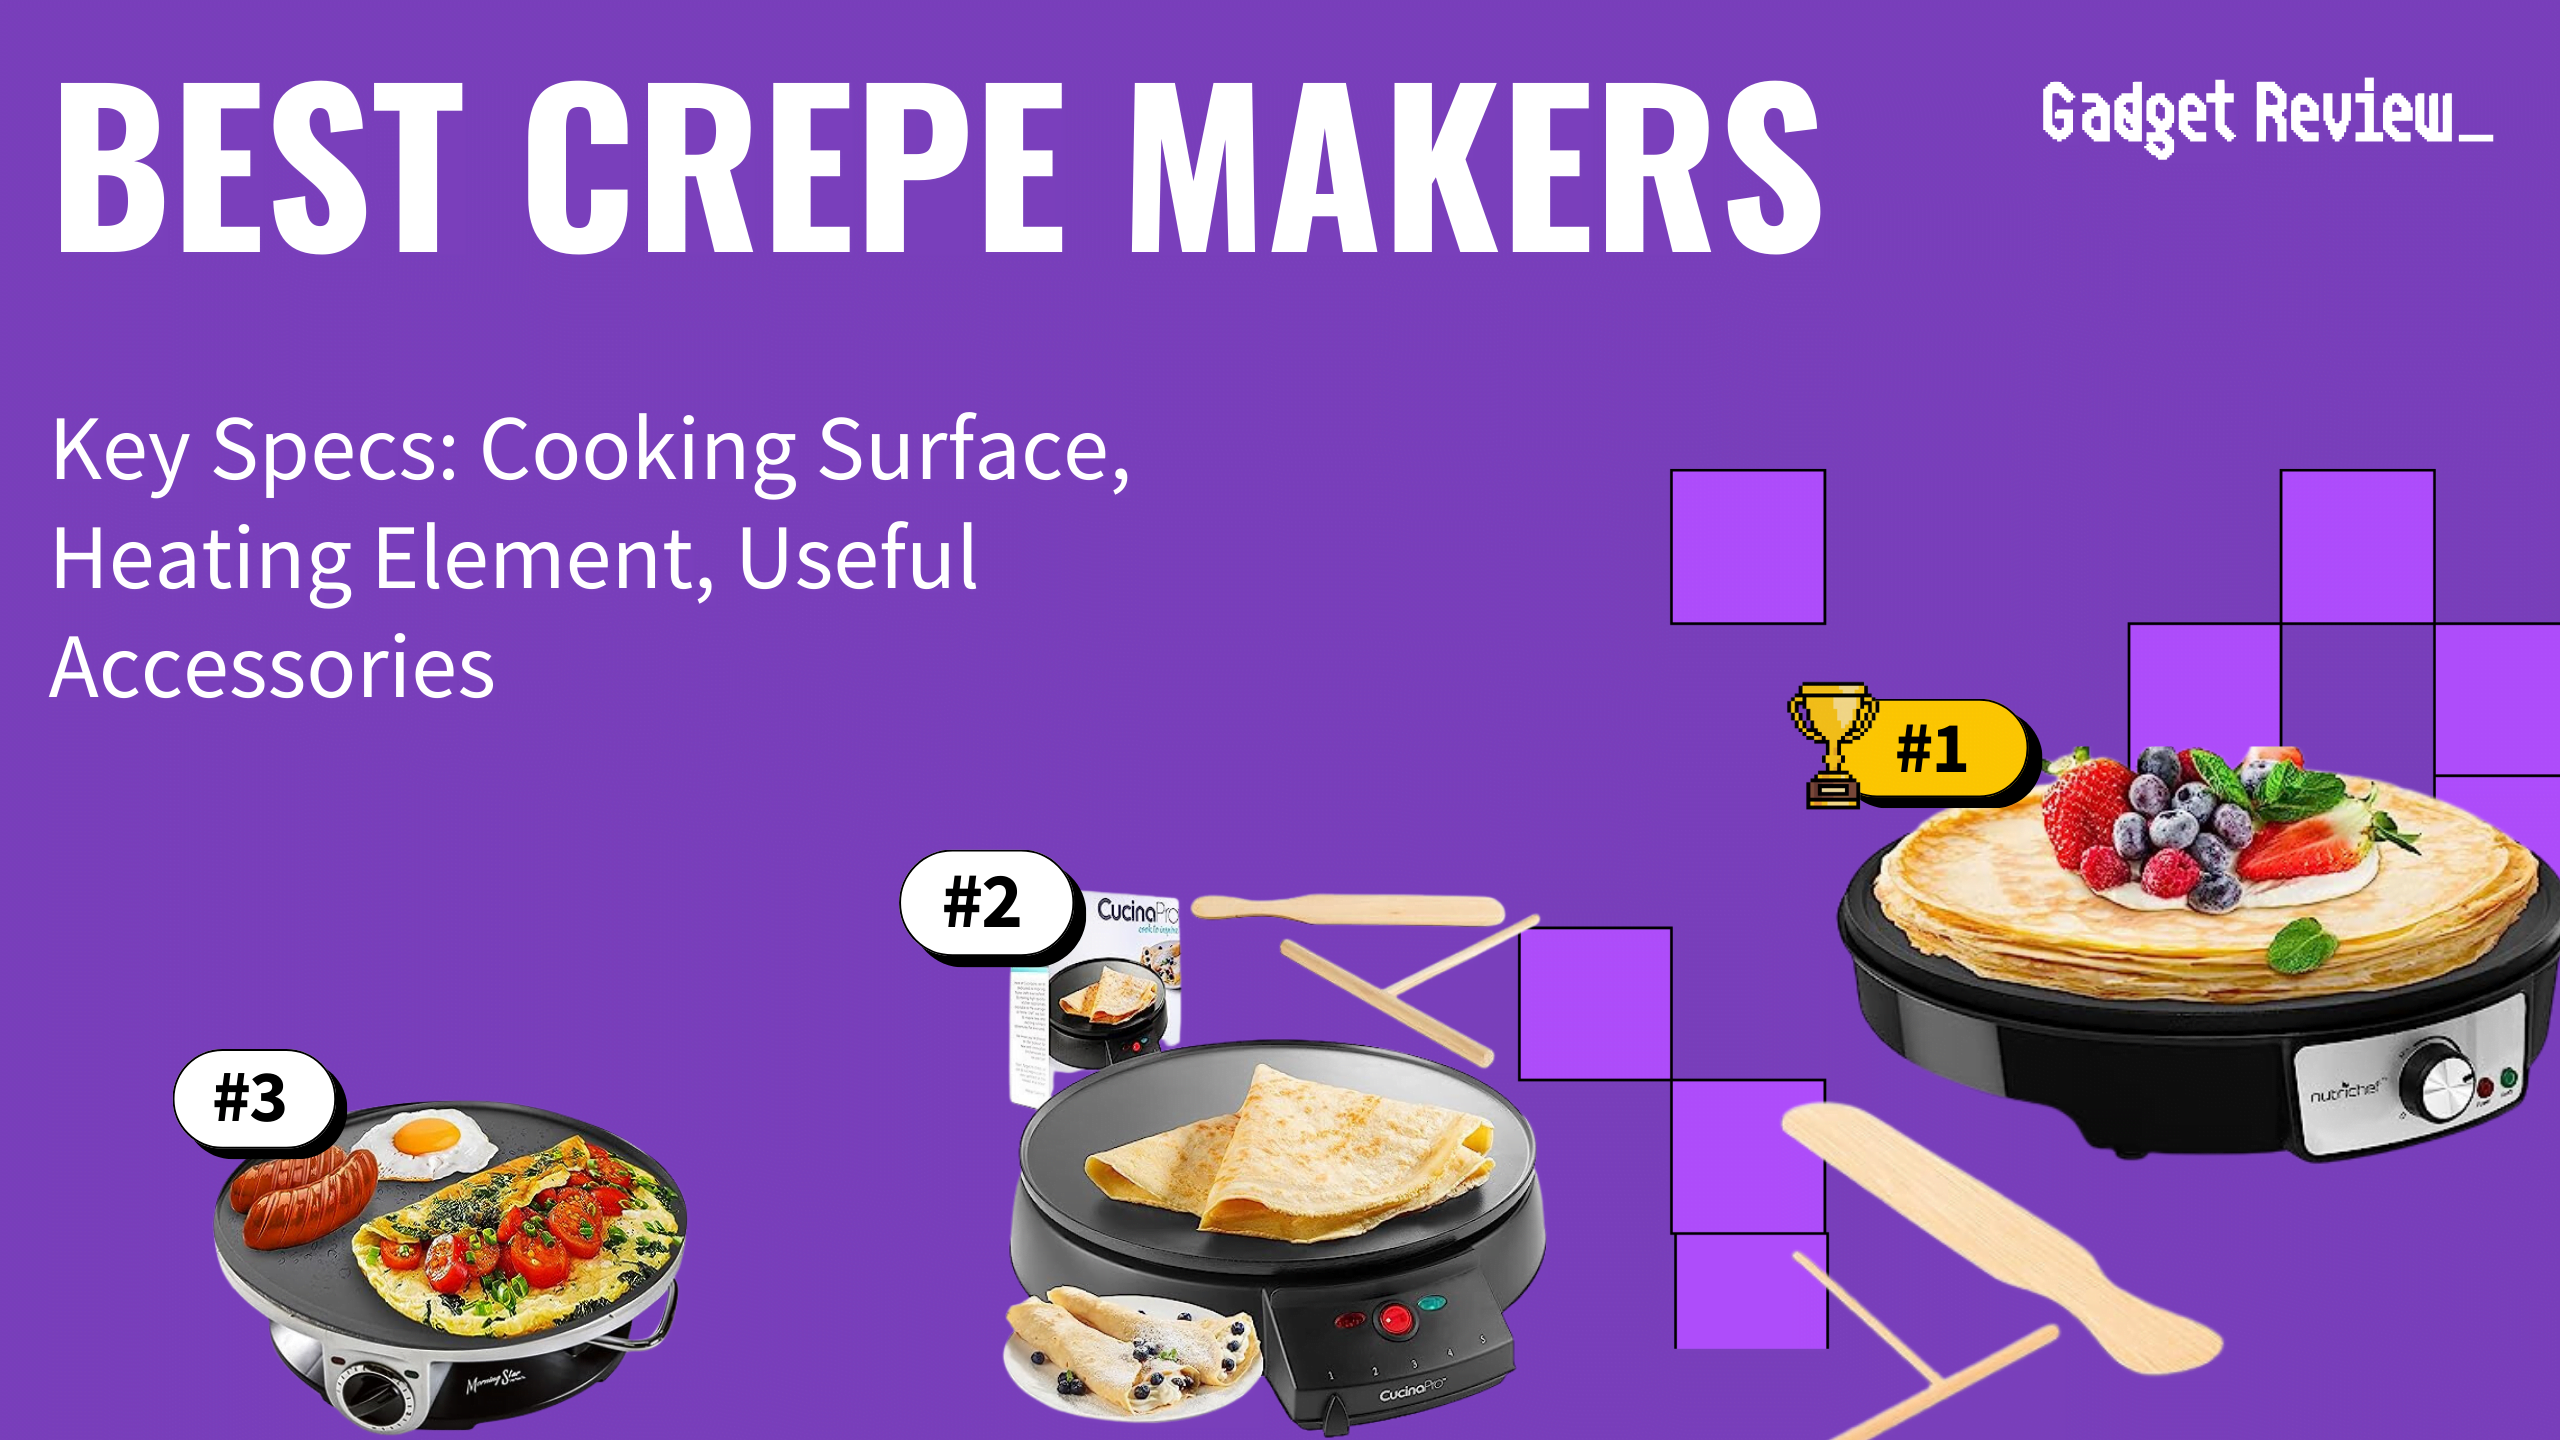 best crepe makers featured image that shows the top three best kitchen product models